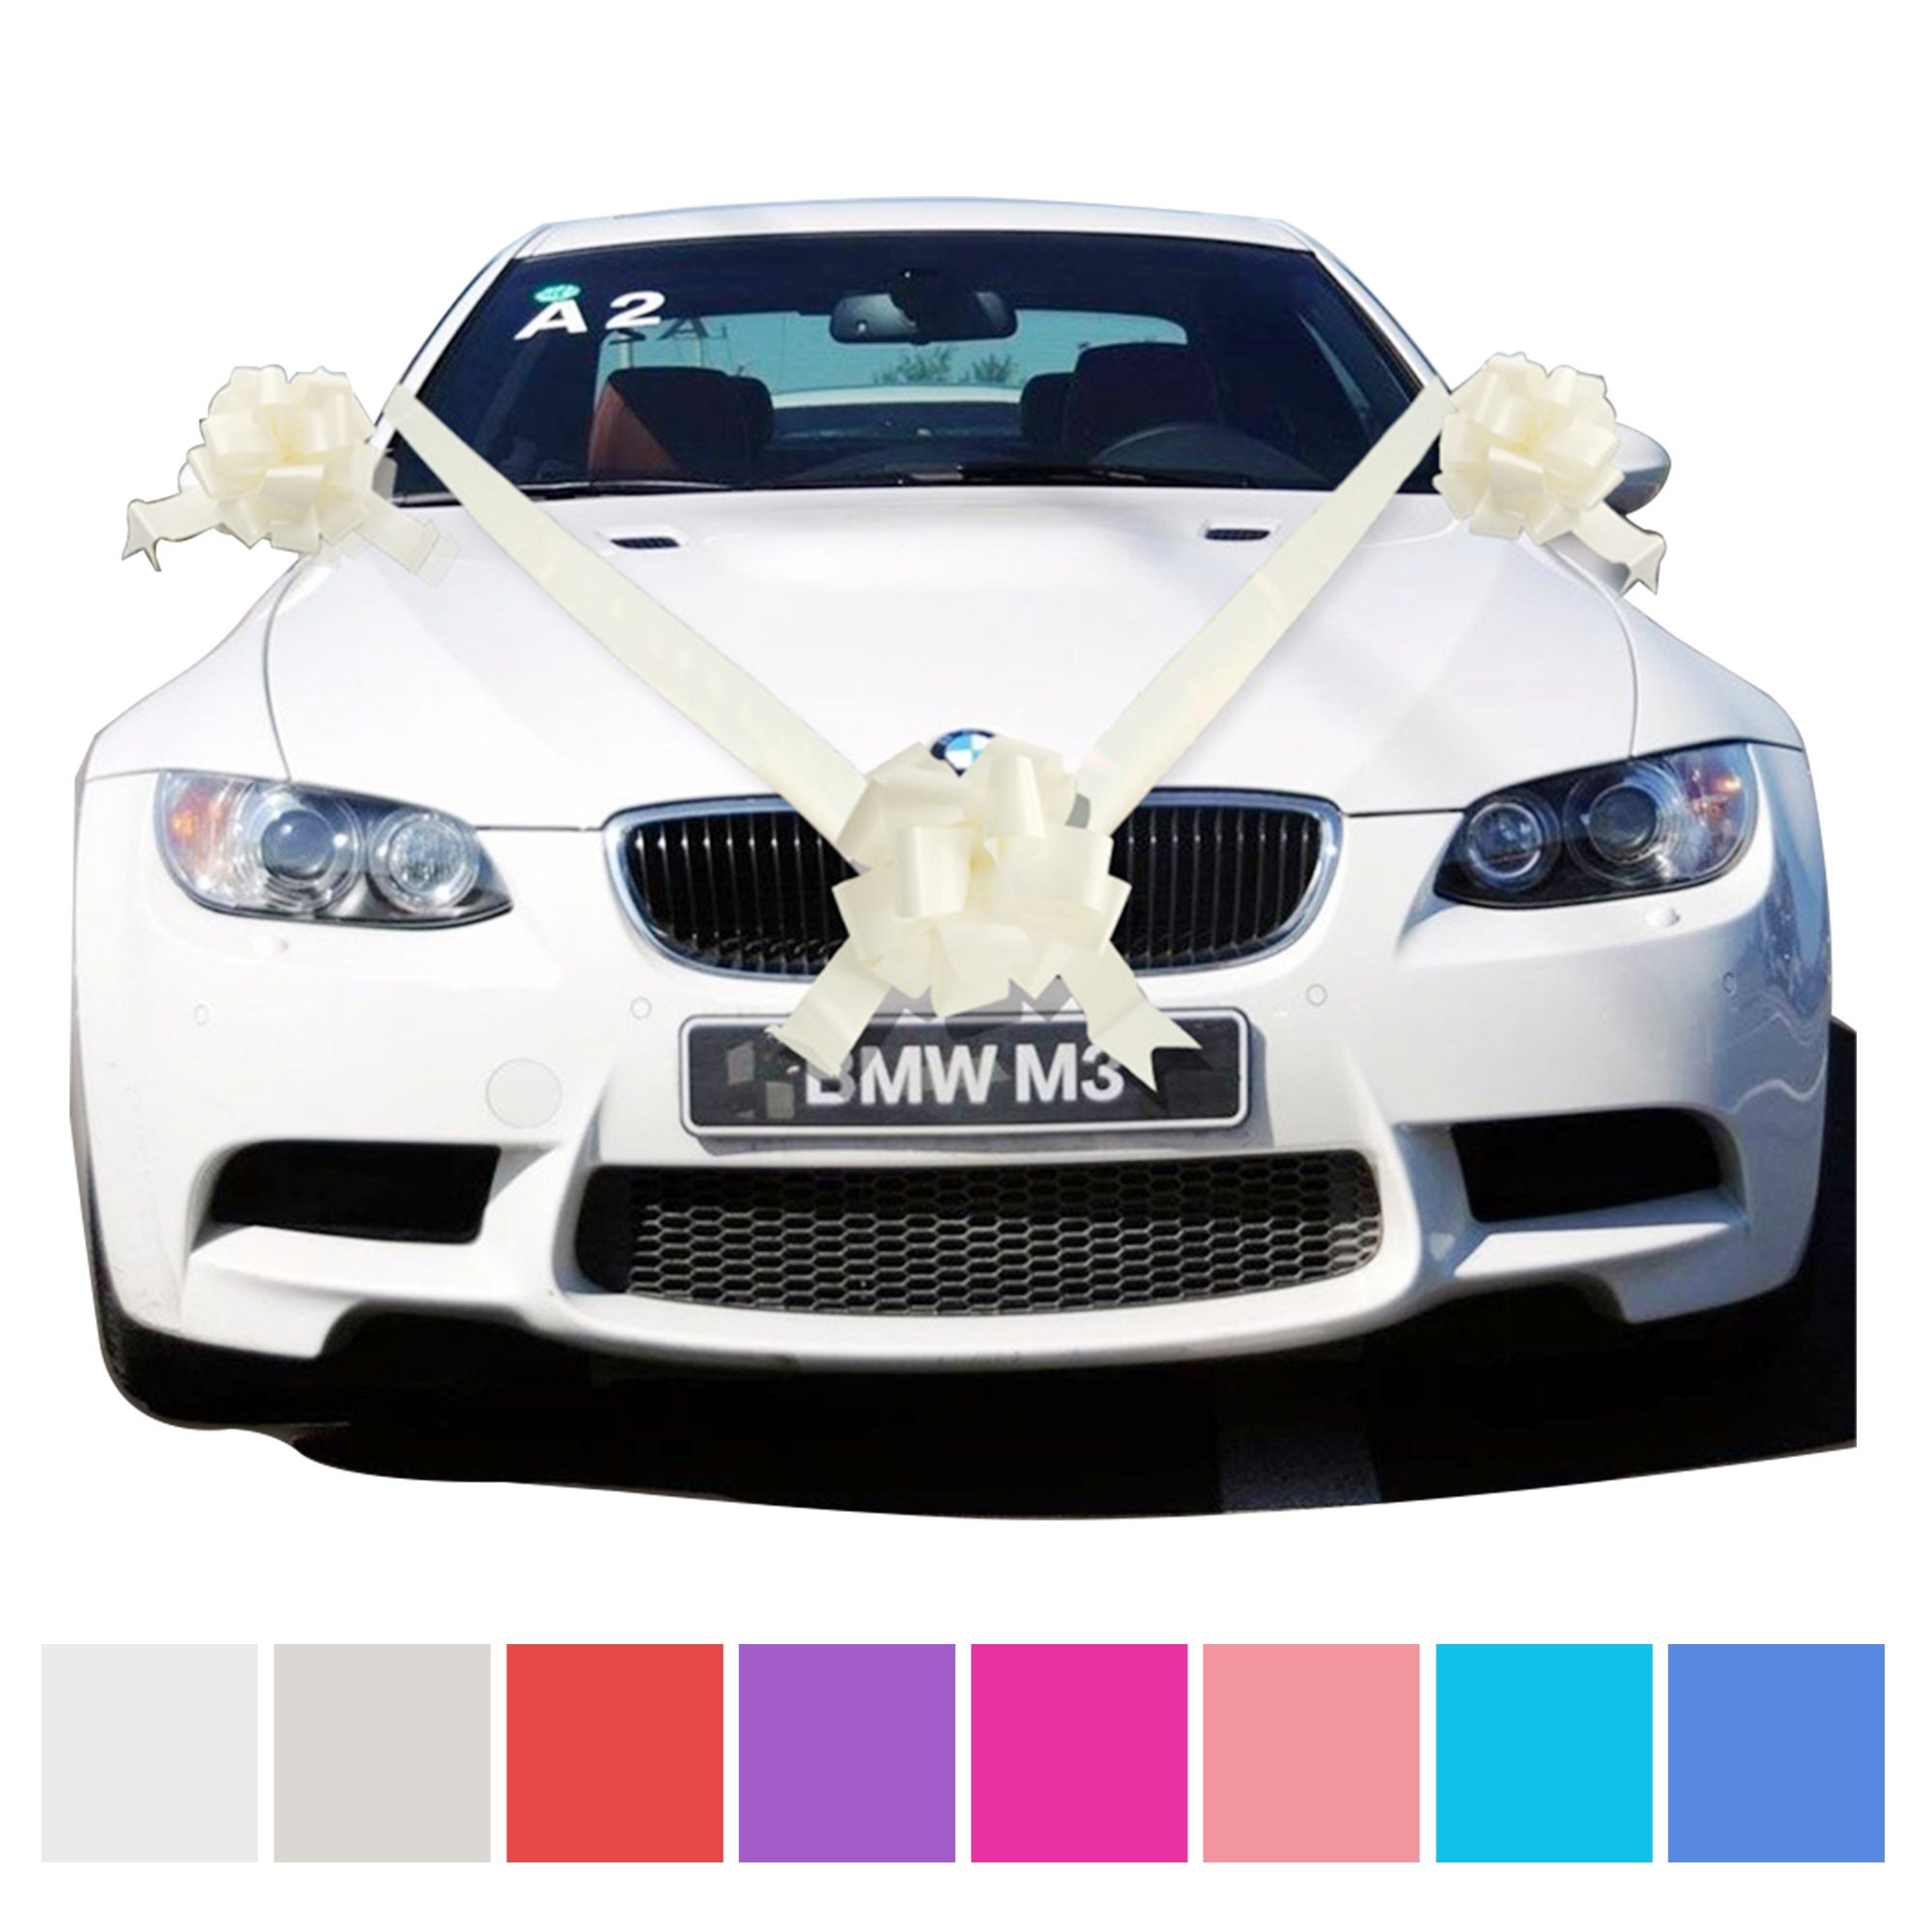 Personalised Wedding Car Ribbon and Bonnet Bow Kit Printed Car Ribbon Kit  Suitable for Prom / Wedding / Birthday Gift 